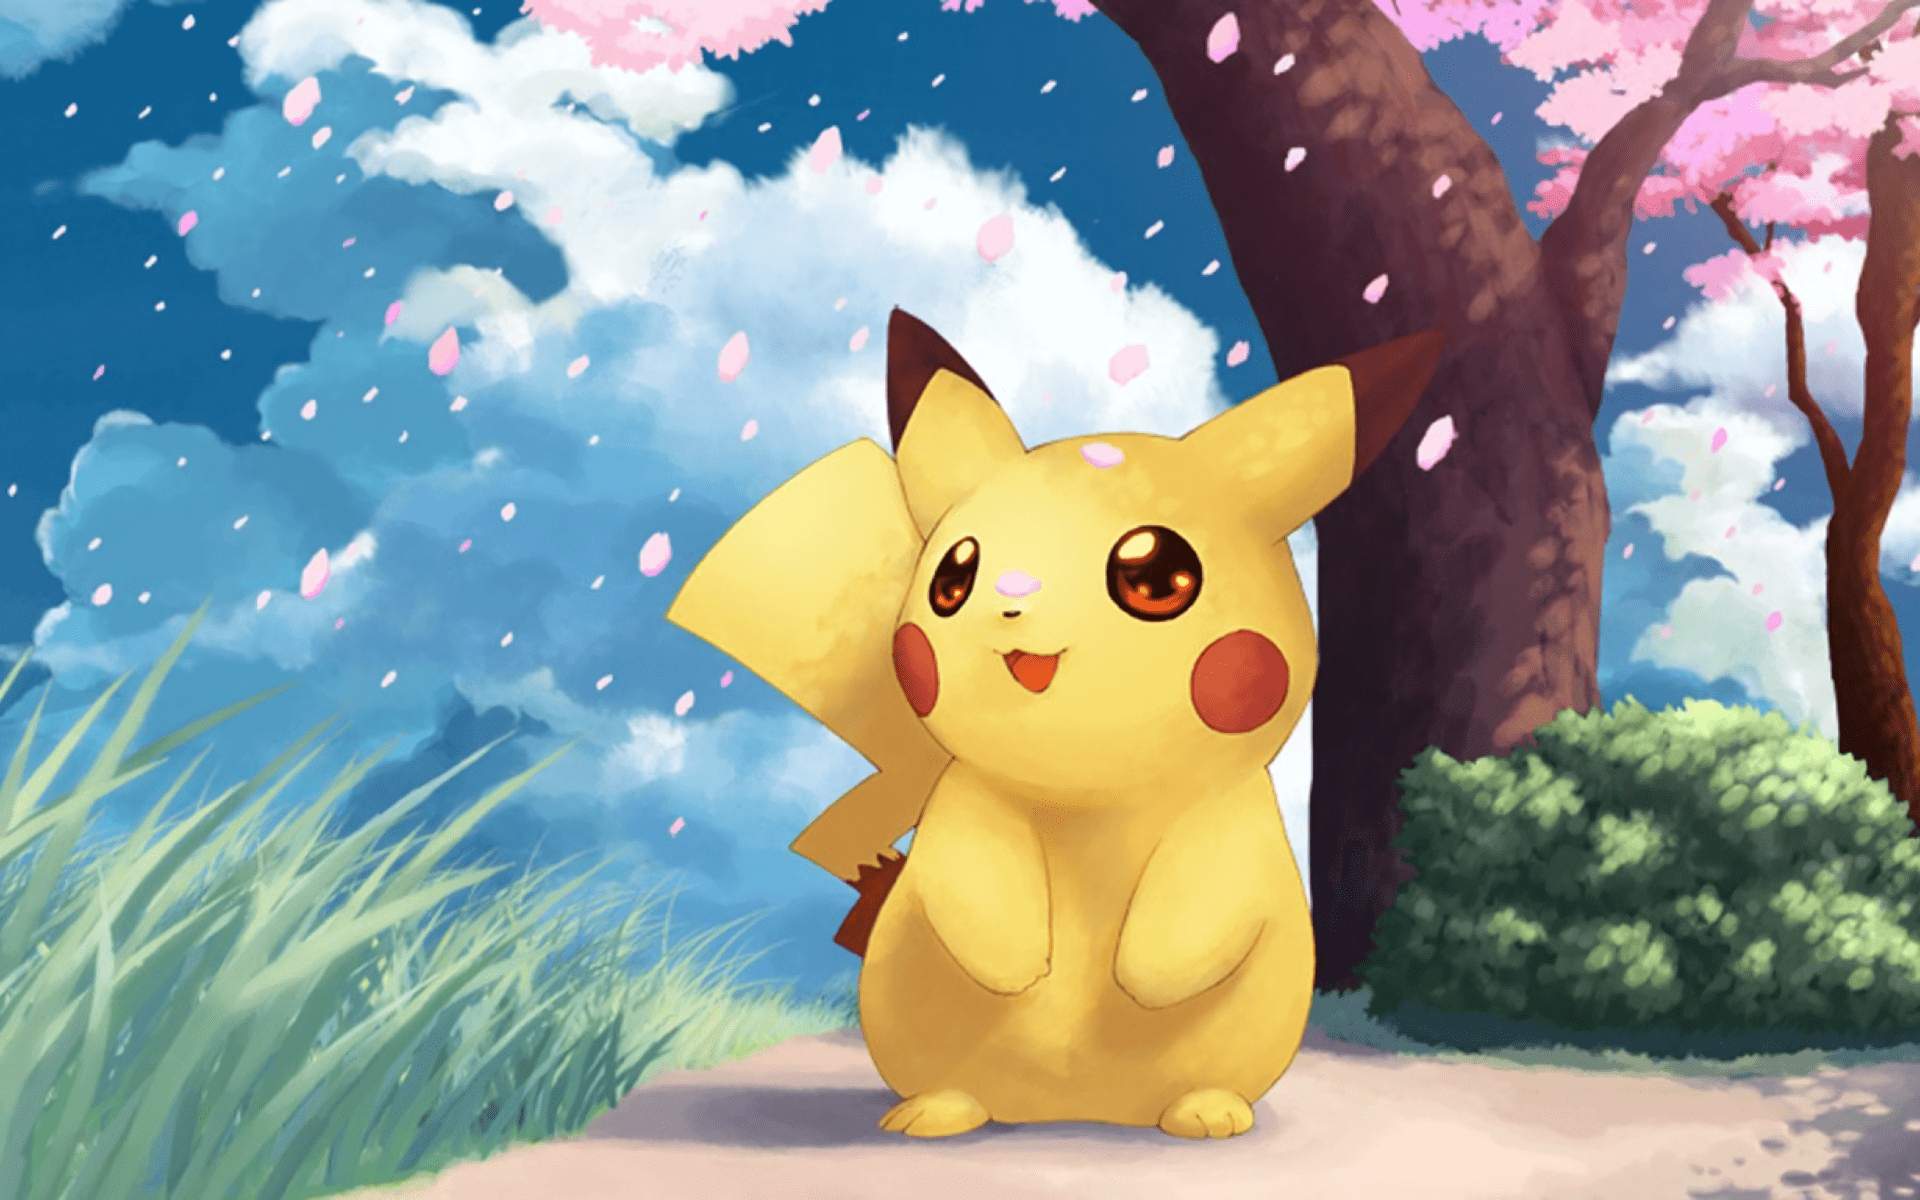 A yellow pikachu is standing by some trees - Pikachu